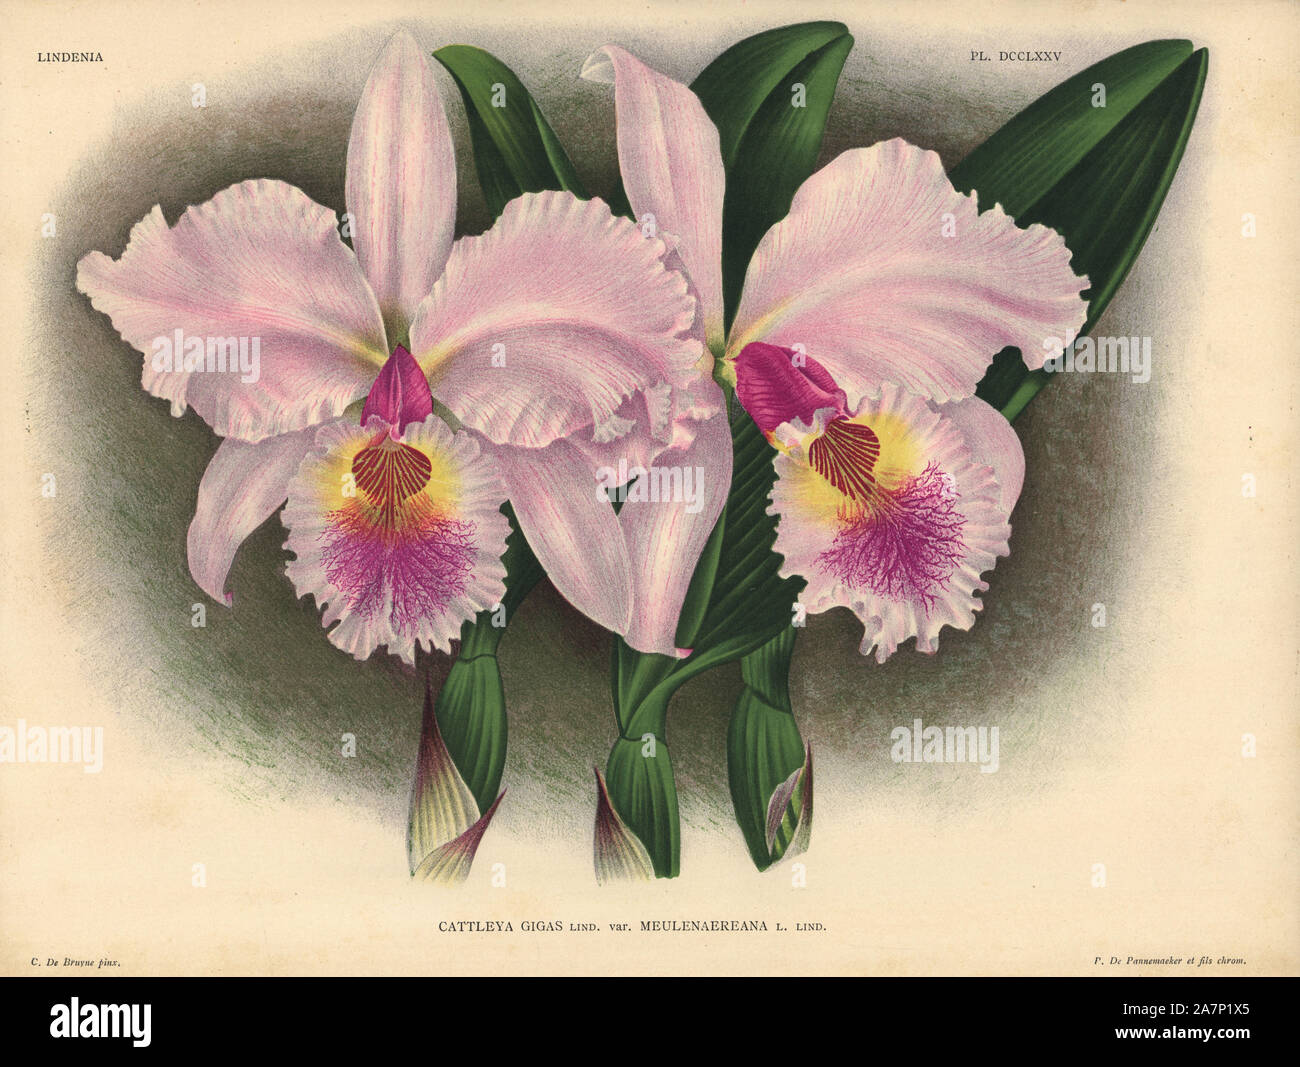 Meulenaereana variety of Cattleya gigas, Lind., hybrid orchid. Illustration drawn by C. de Bruyne and chromolithographed by P. de Pannemaeker et fils from Lucien Linden's 'Lindenia, Iconographie des Orchidees,' Brussels, 1902. Stock Photo